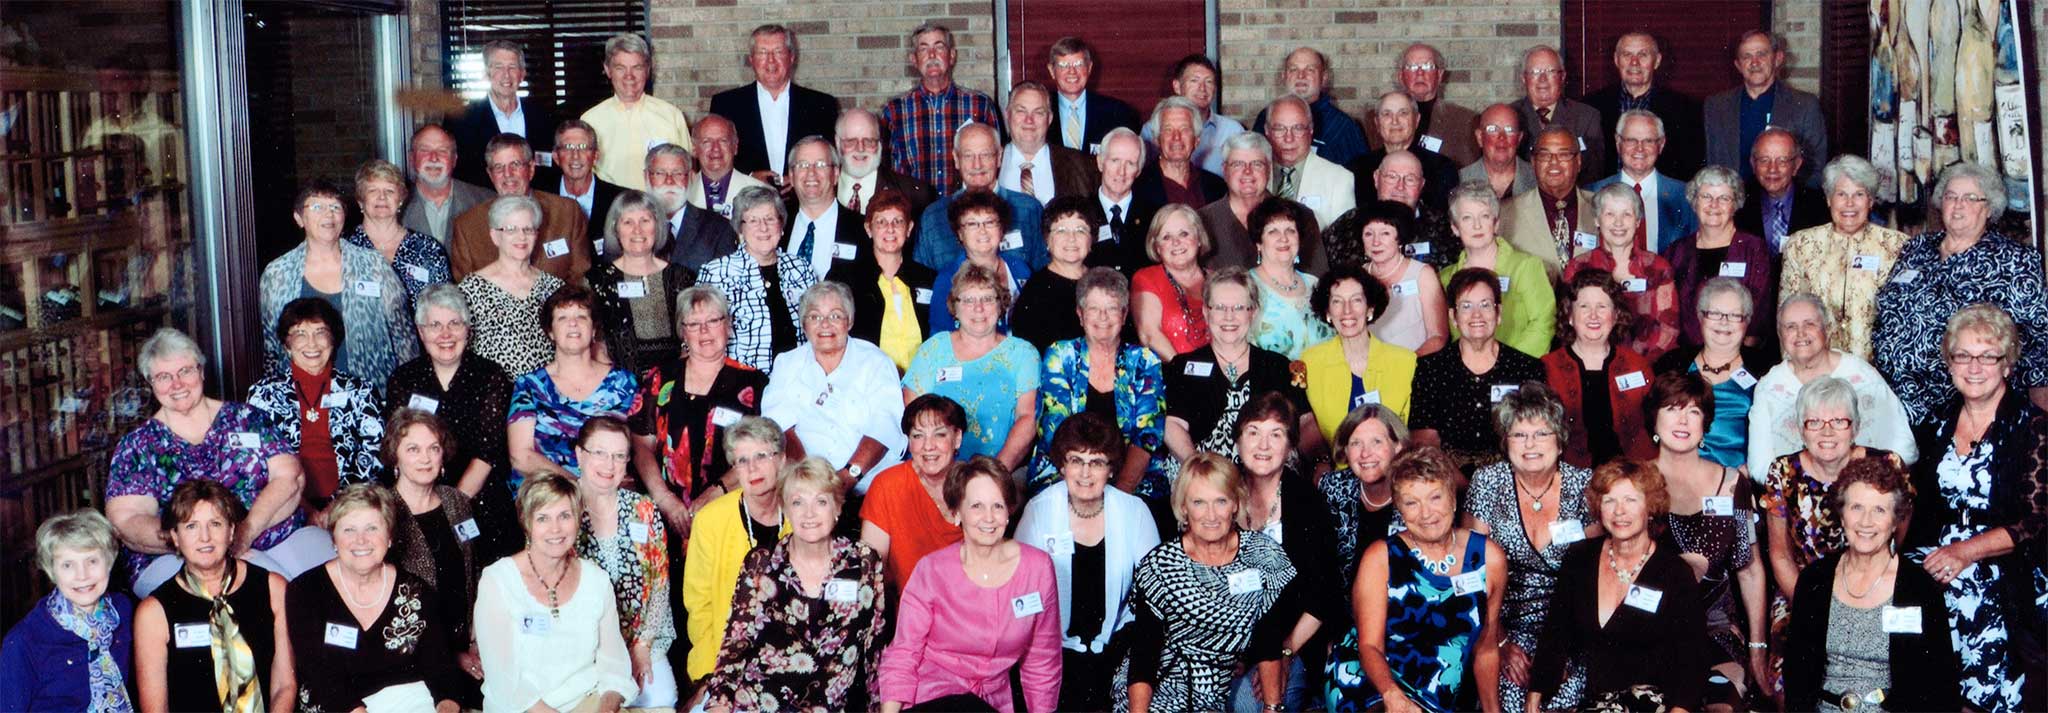 class of 1962 50 year reuion group picture